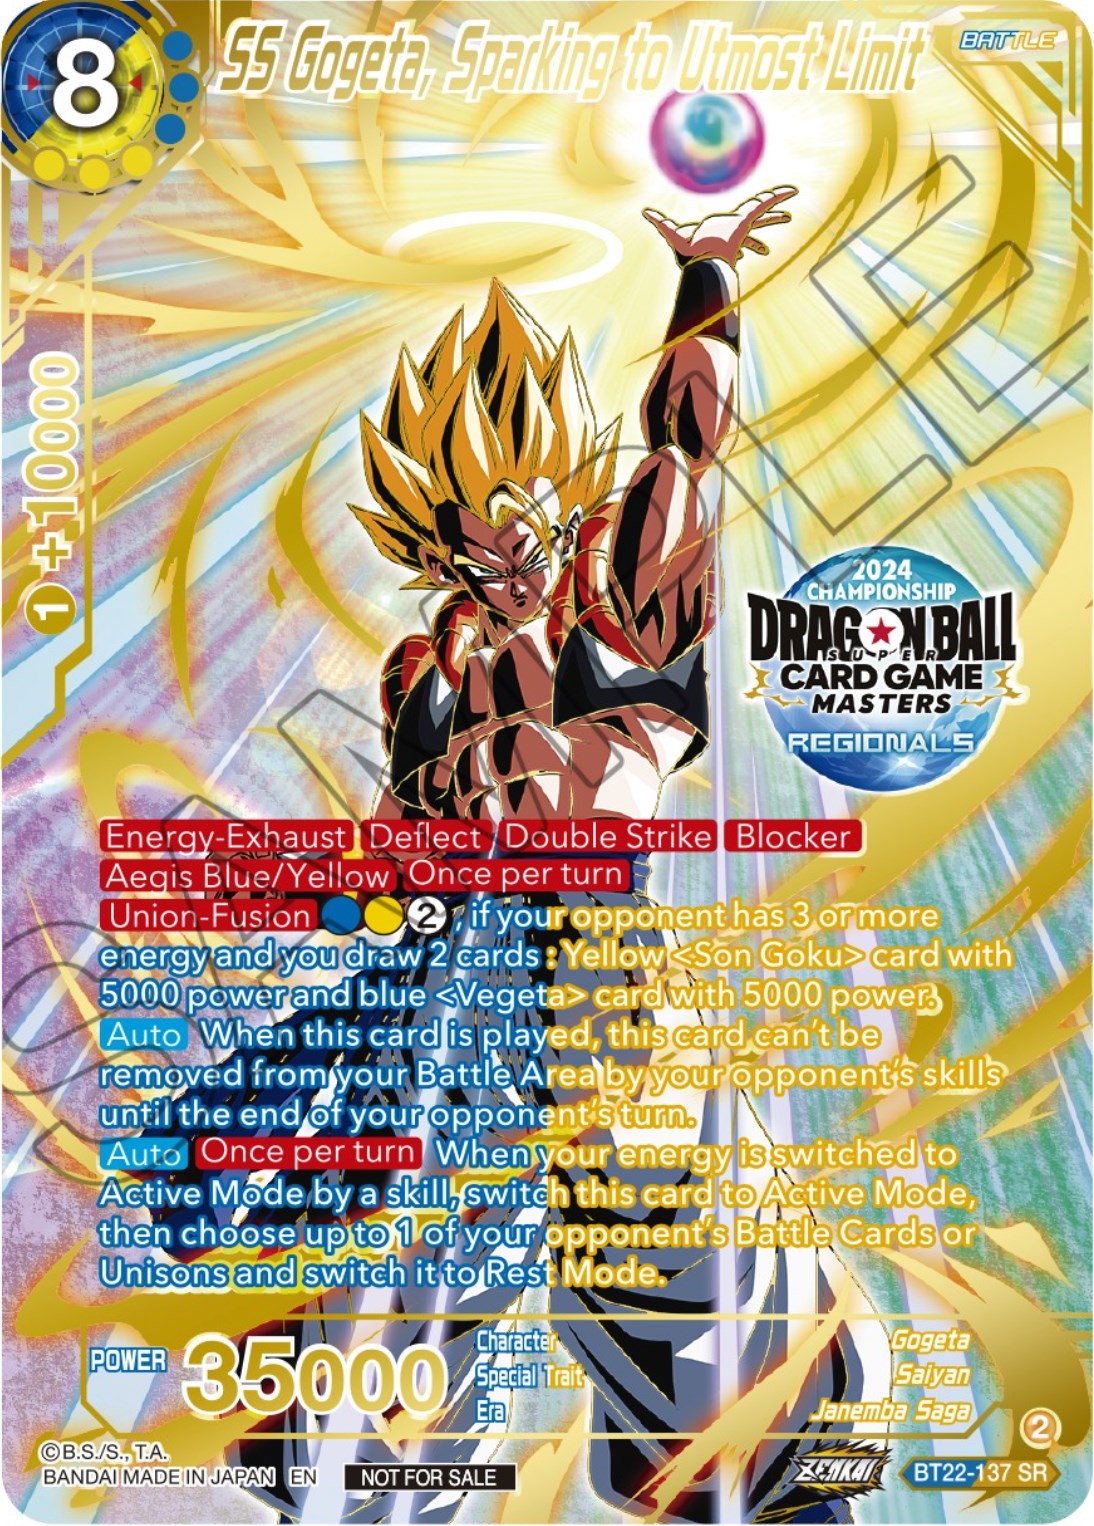 SS Gogeta, Sparking to Utmost Limit (2024 Championship Regionals Top 16) (BT22-137) [Tournament Promotion Cards] | Pegasus Games WI